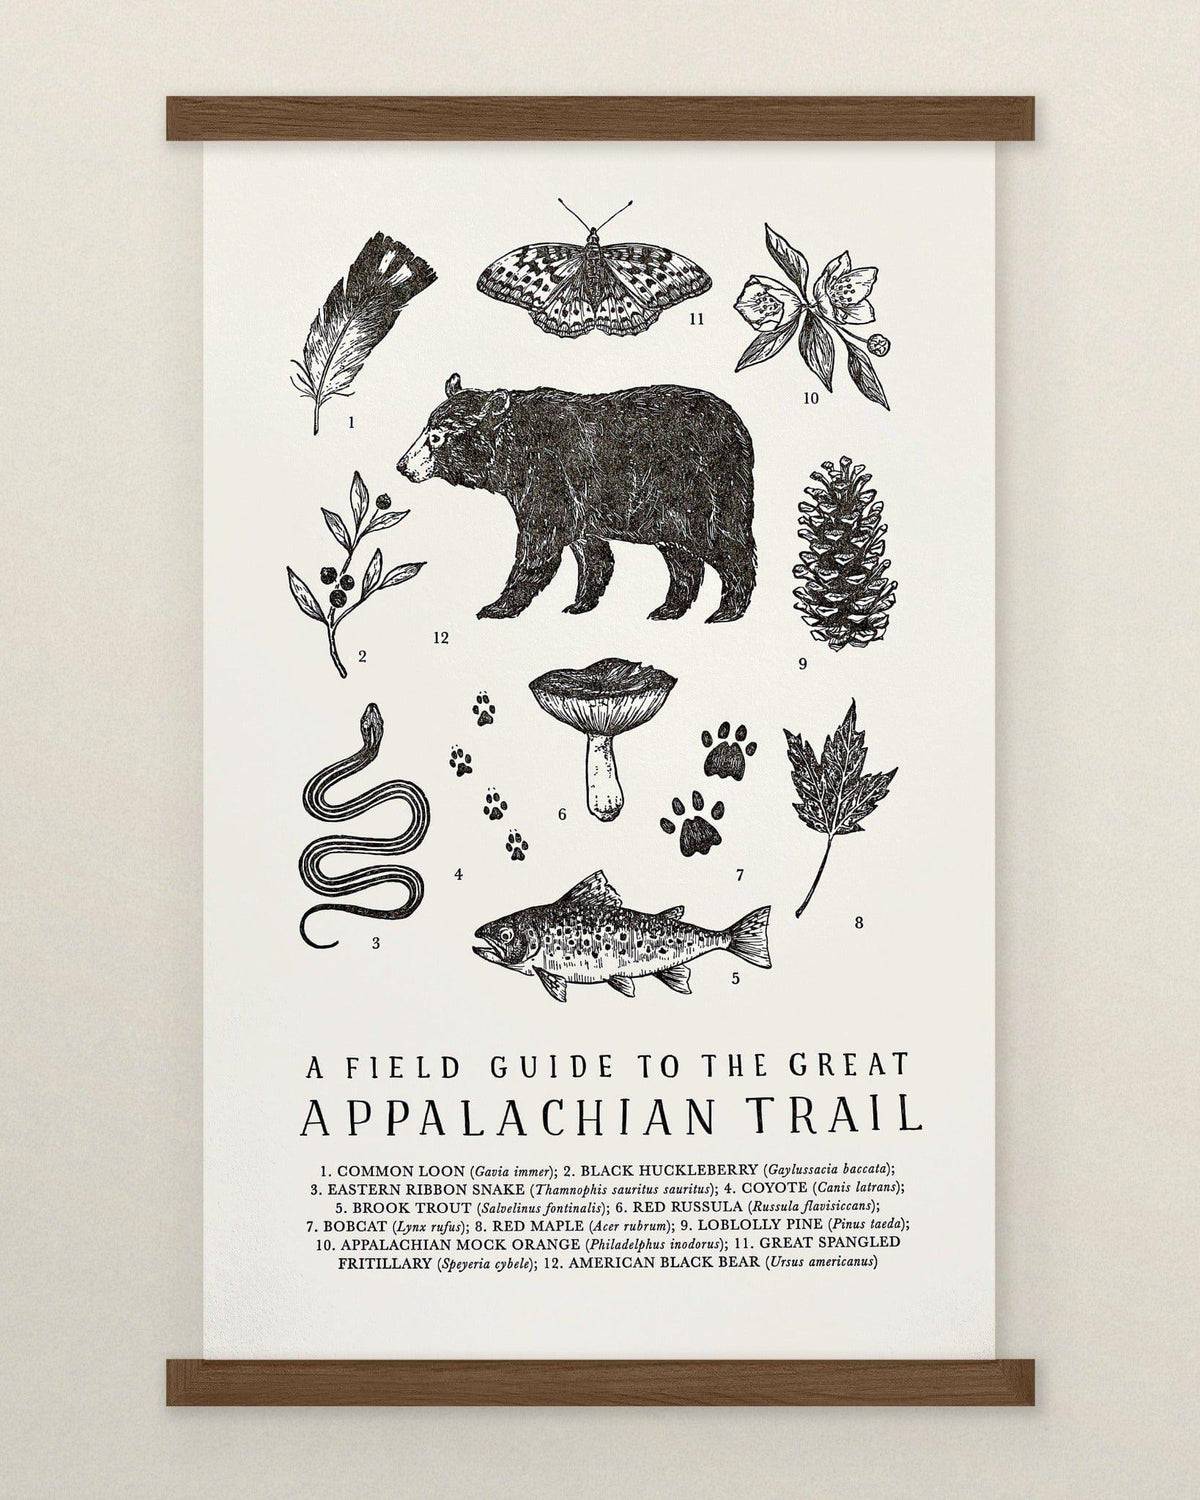 A field guide to the great Appalachian Trail poster becomes The Wild Wander&#39;s Appalachian Trail Field Guide Art Print.